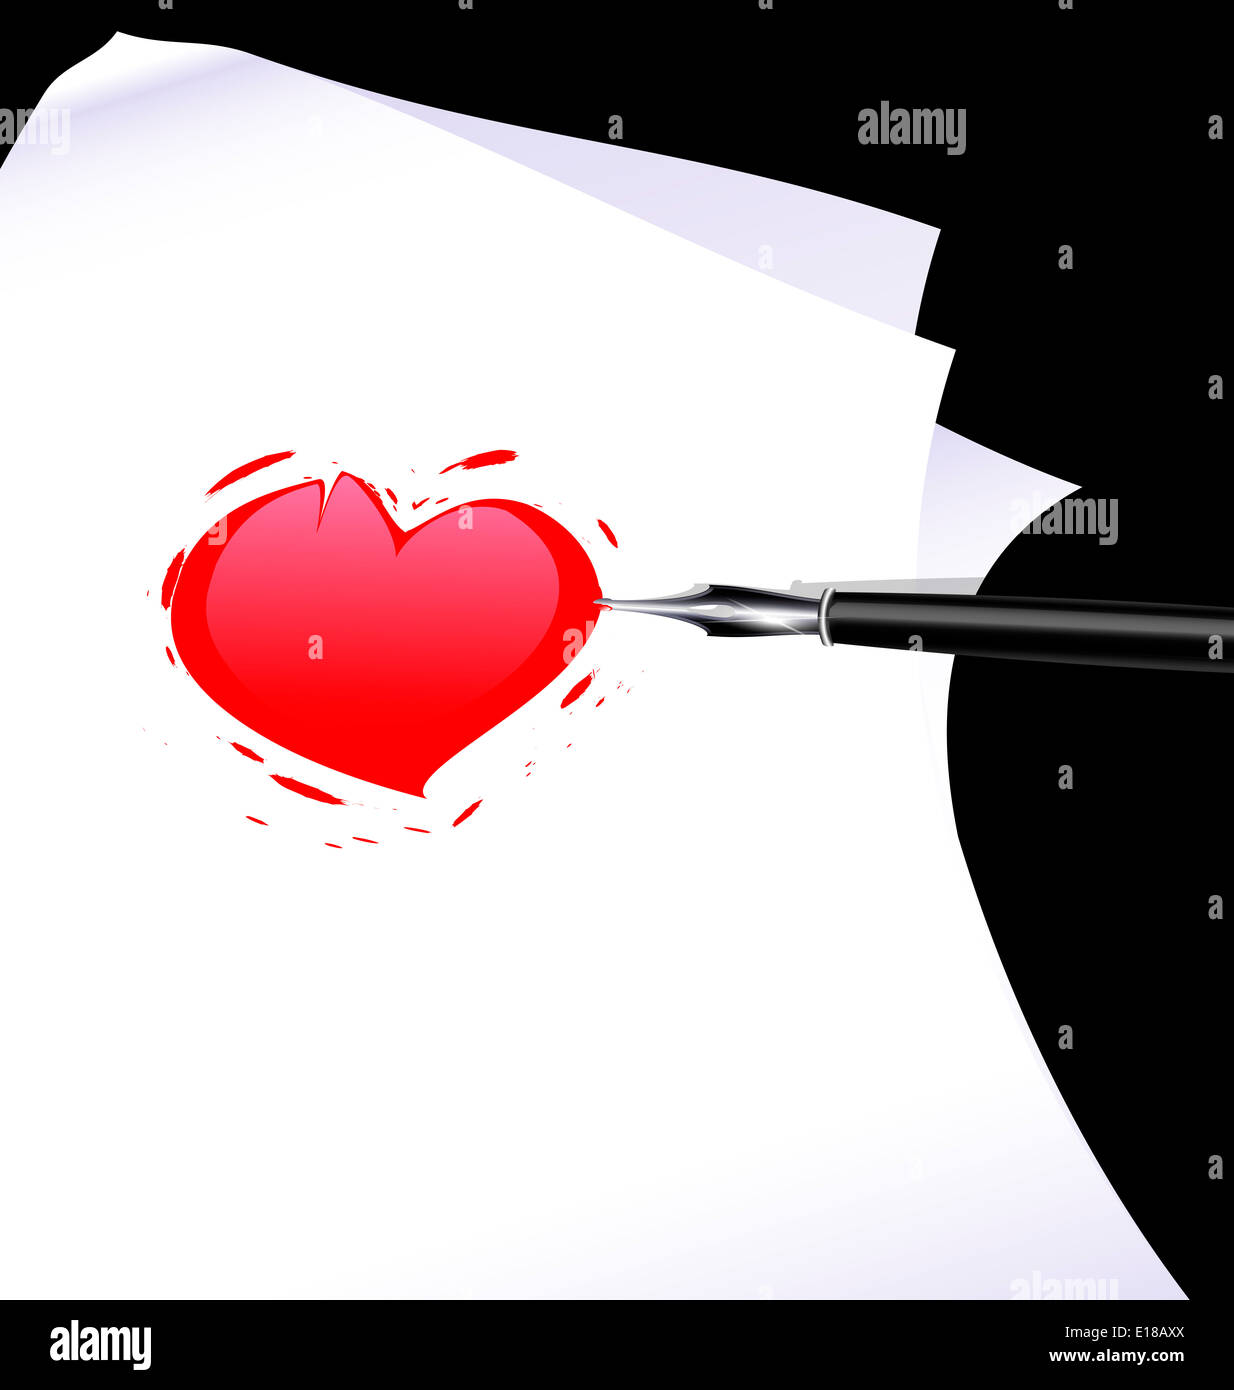 sheet of paper, writing pen and red heart Stock Photo